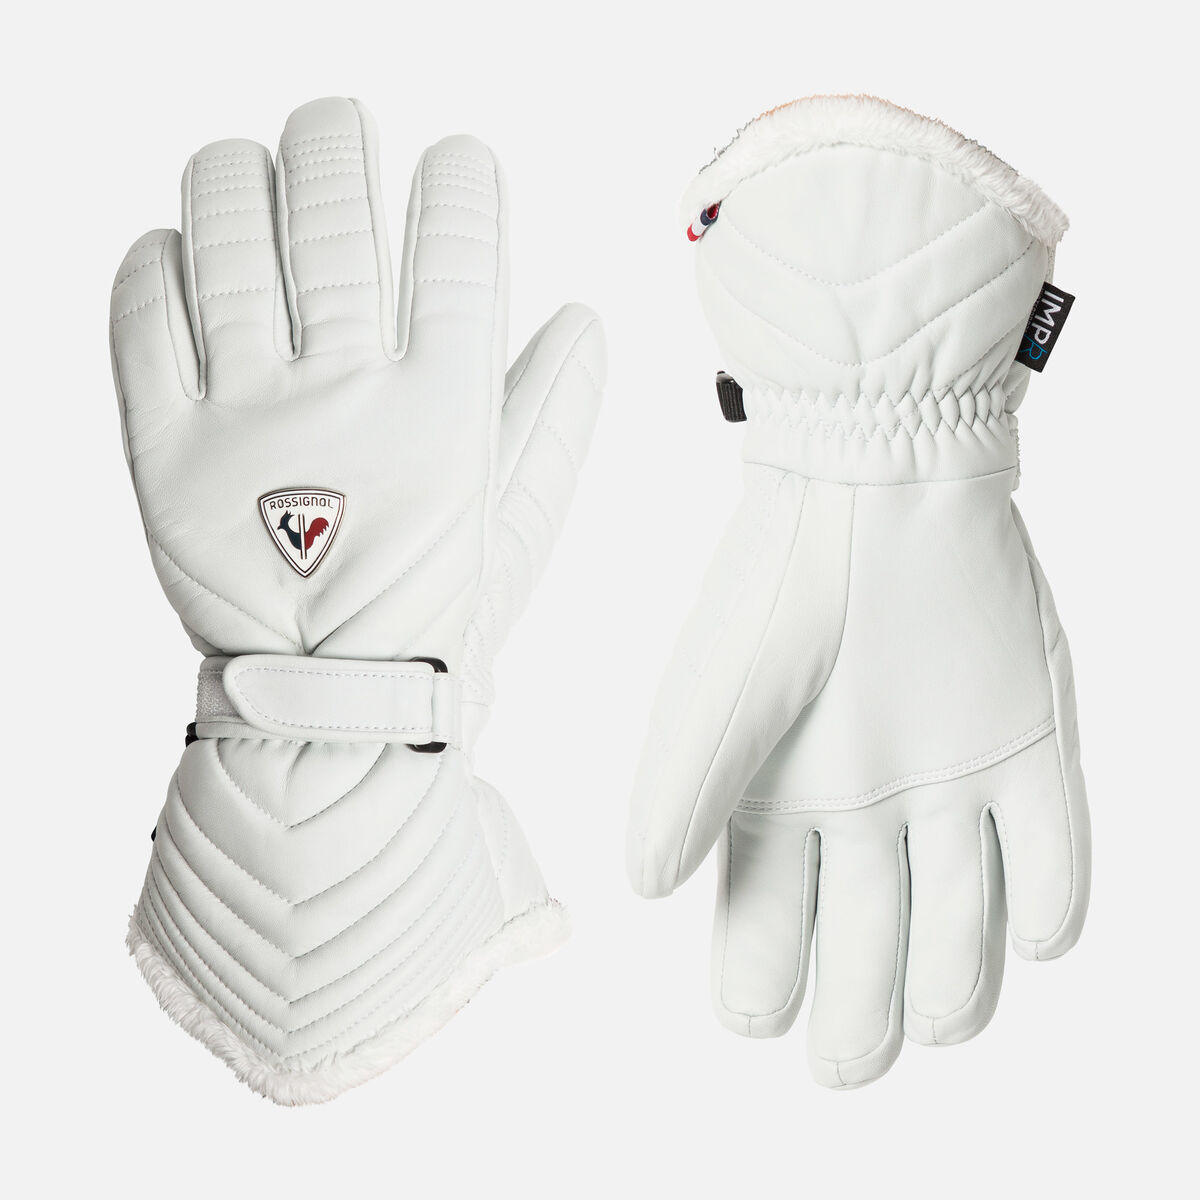 Guantes Ski Adulto Mujer - Esell.cl